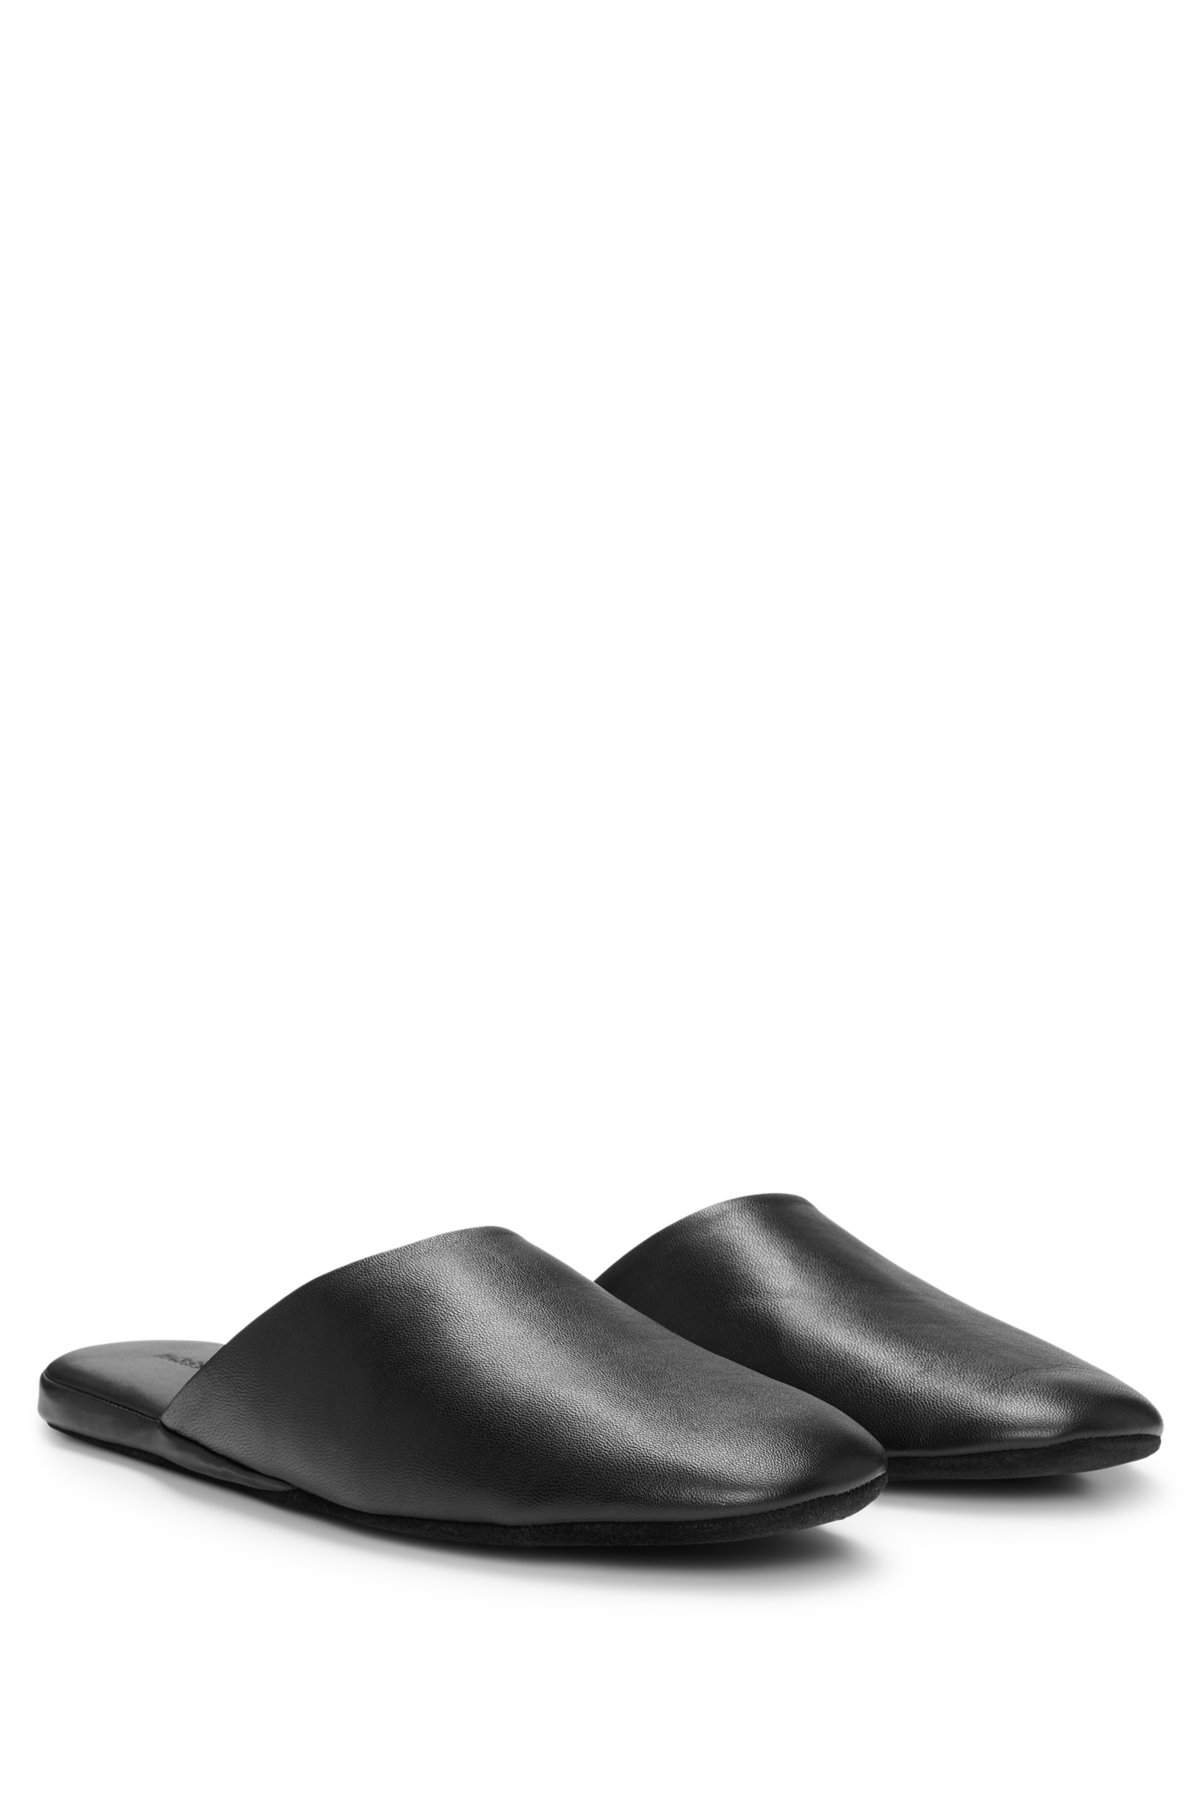 BOSS - Travel slippers in soft leather